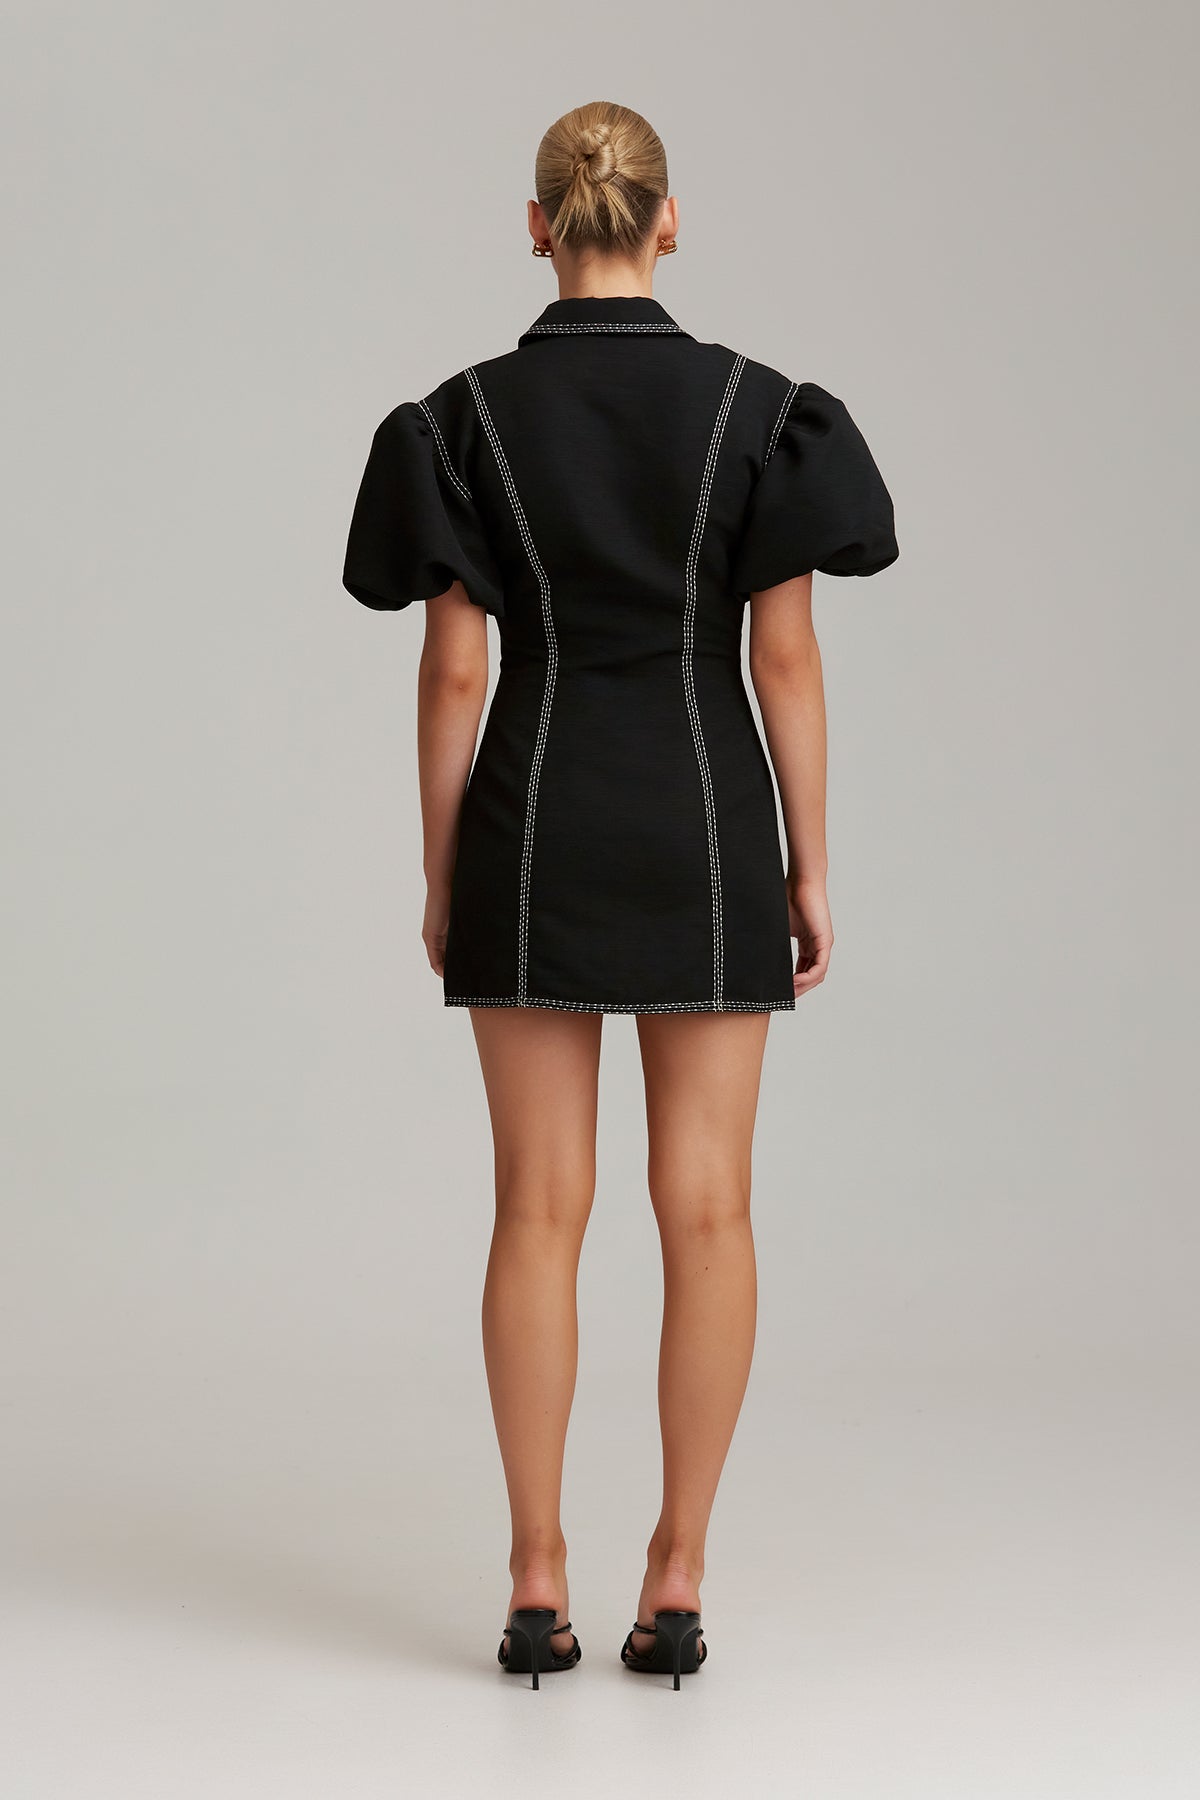 C/MEO Collective - Out Of Time Dress - Black